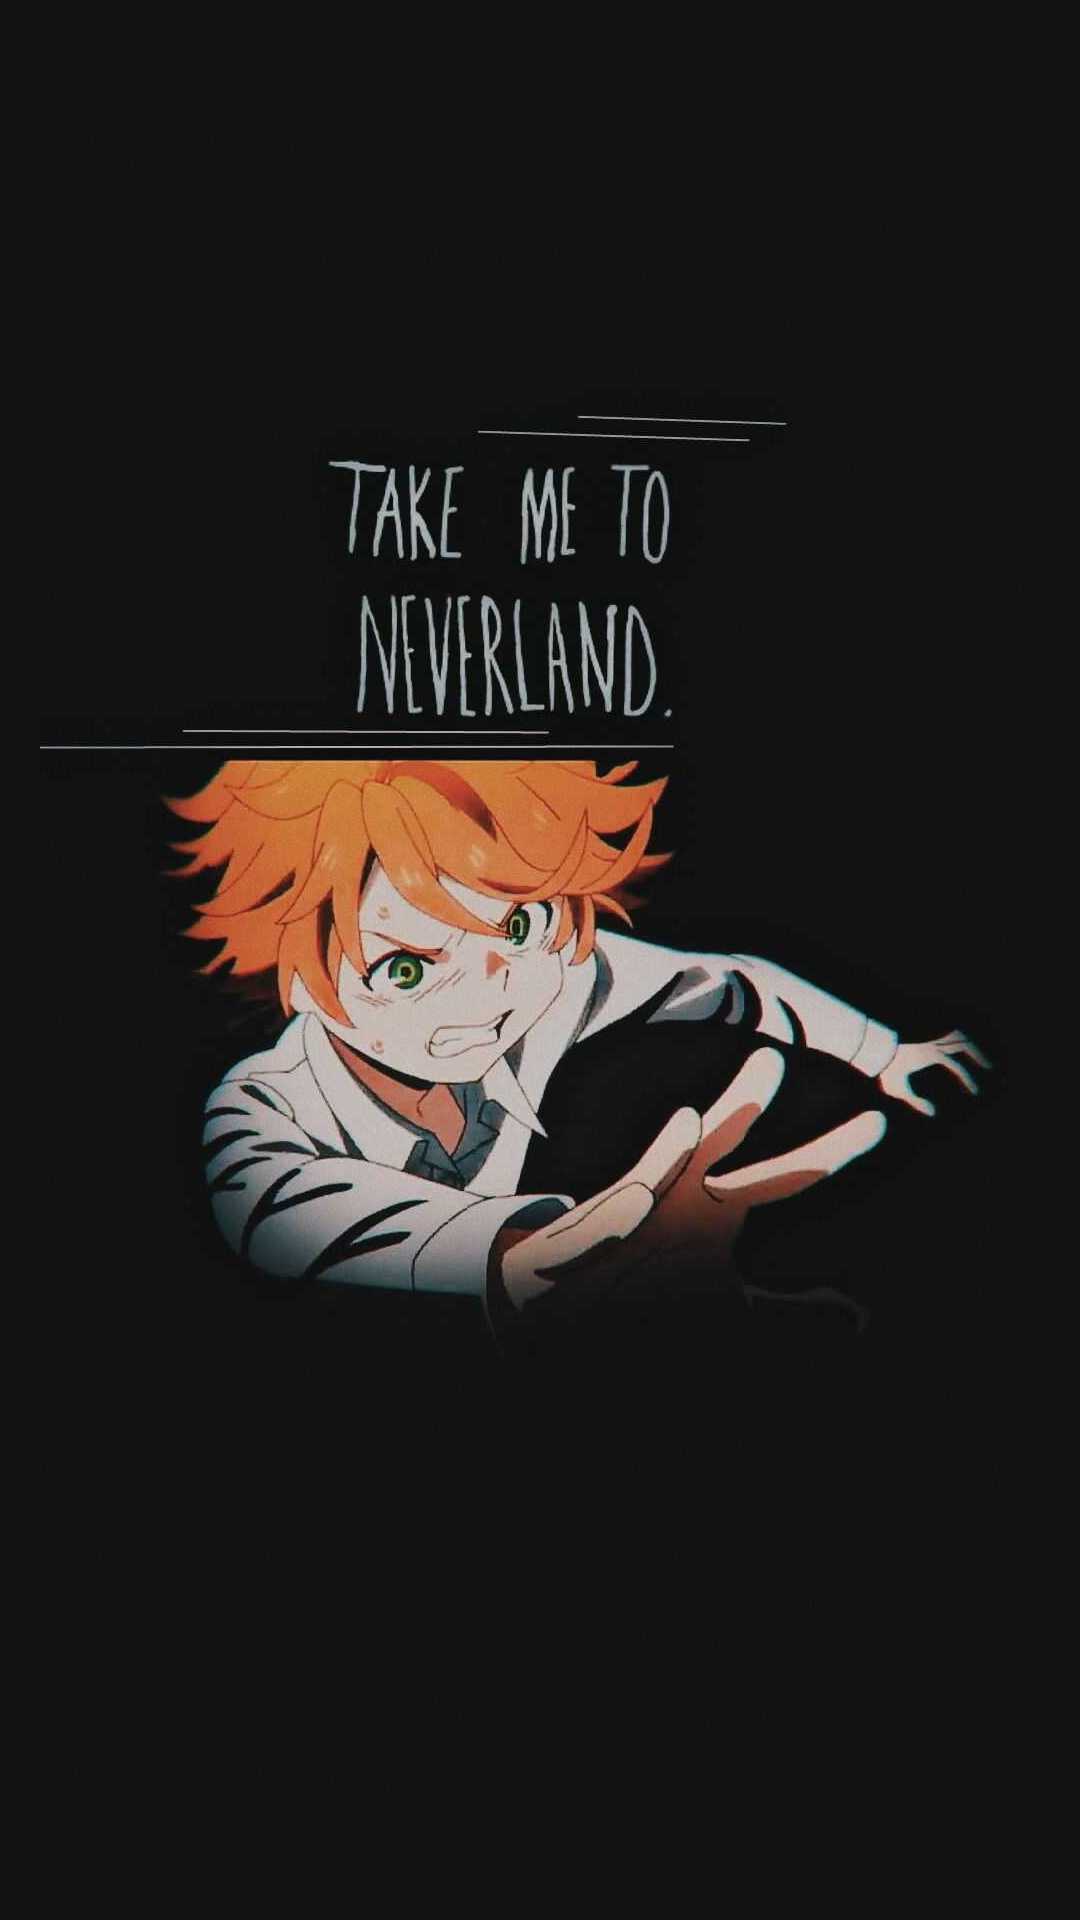 The promised neverland wallpaper. by Peridot1331 on DeviantArt